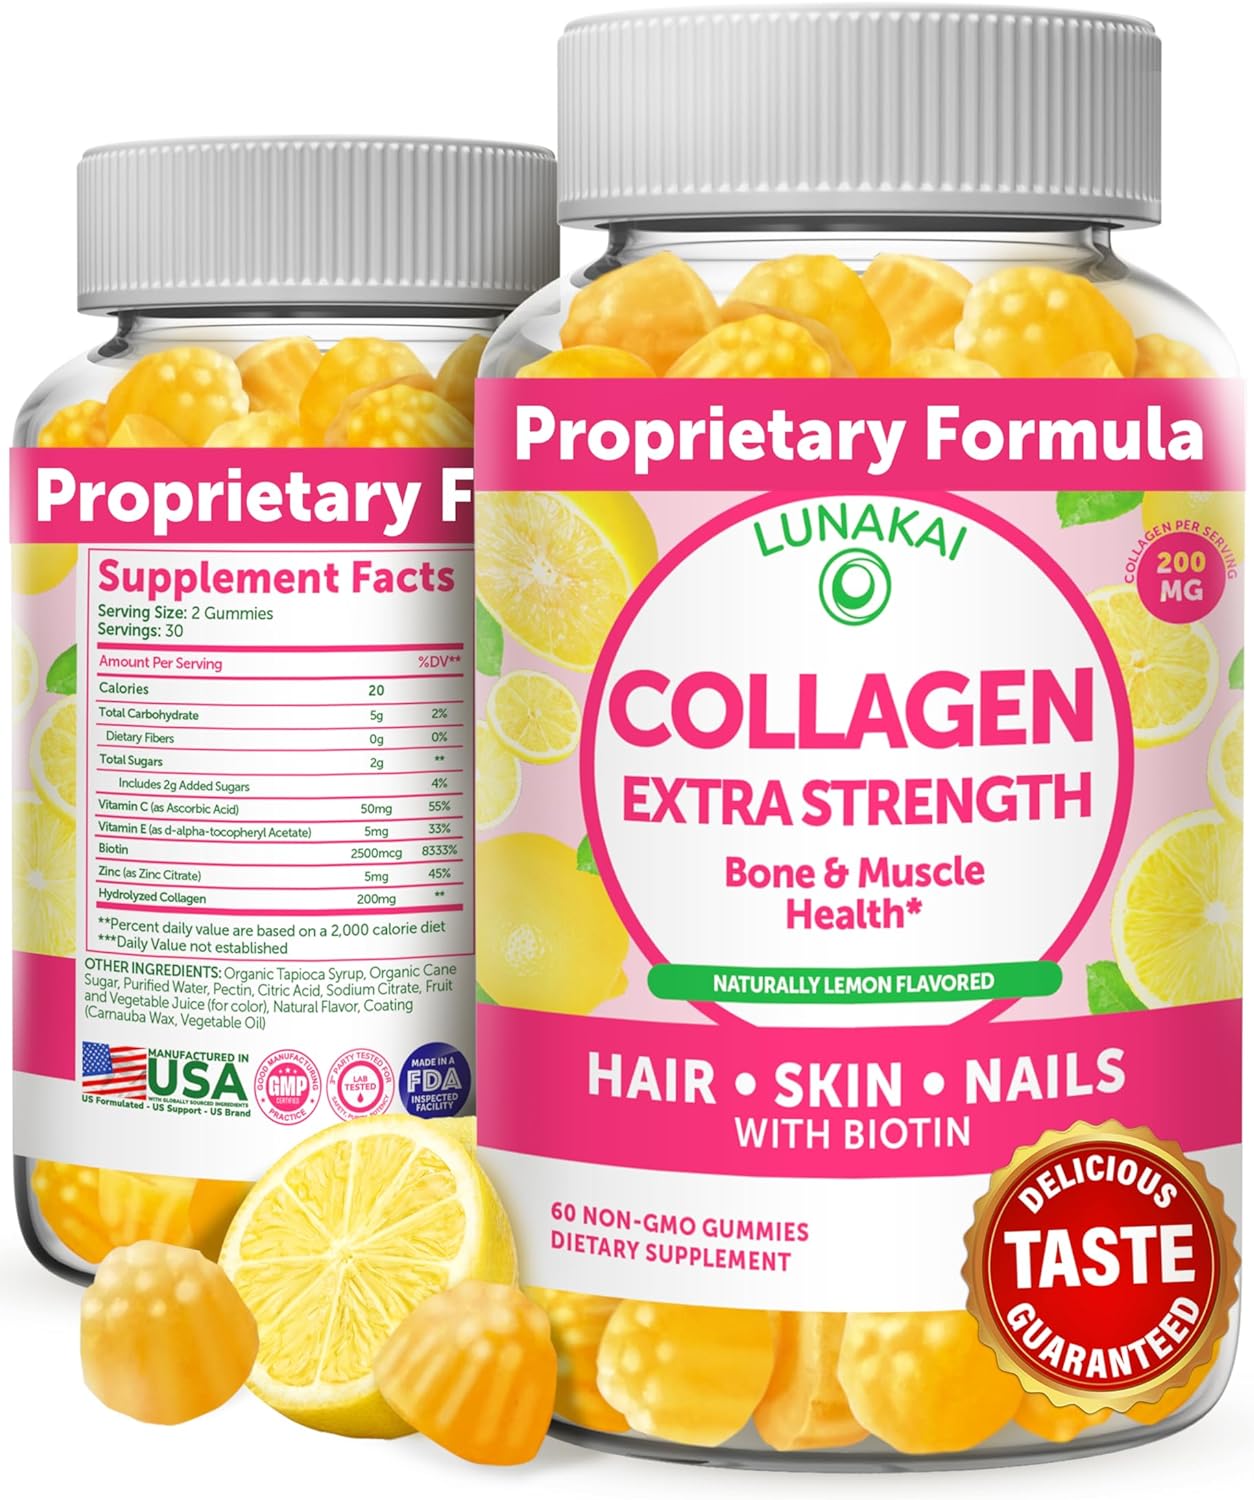 Collagen Gummies - Tastiest Proprietary Formula - 200mg Hydrolyzed Collagen Gummies for Women and Men with Biotin, Zinc, Vitamin C and E - Non-GMO Anti Aging Collagen Supplements for Women - 60 Count